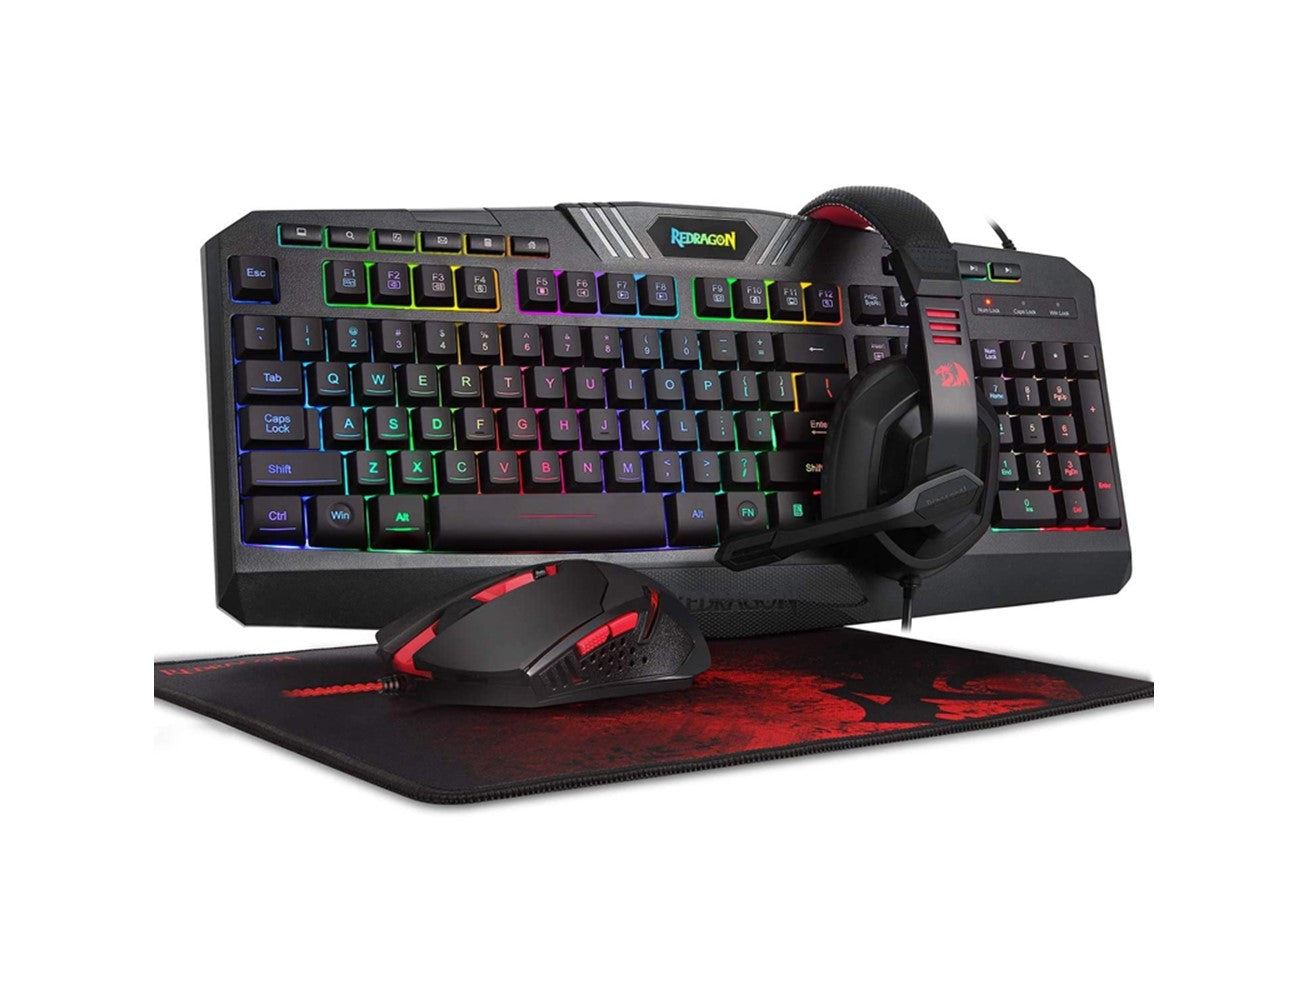 I5 GAMING PC, i5-12400F, RTX 3060Ti - 8GB with Redragon S101 PC Gaming Keyboard and Mouse Combo, Mousepad, Headset with Mic